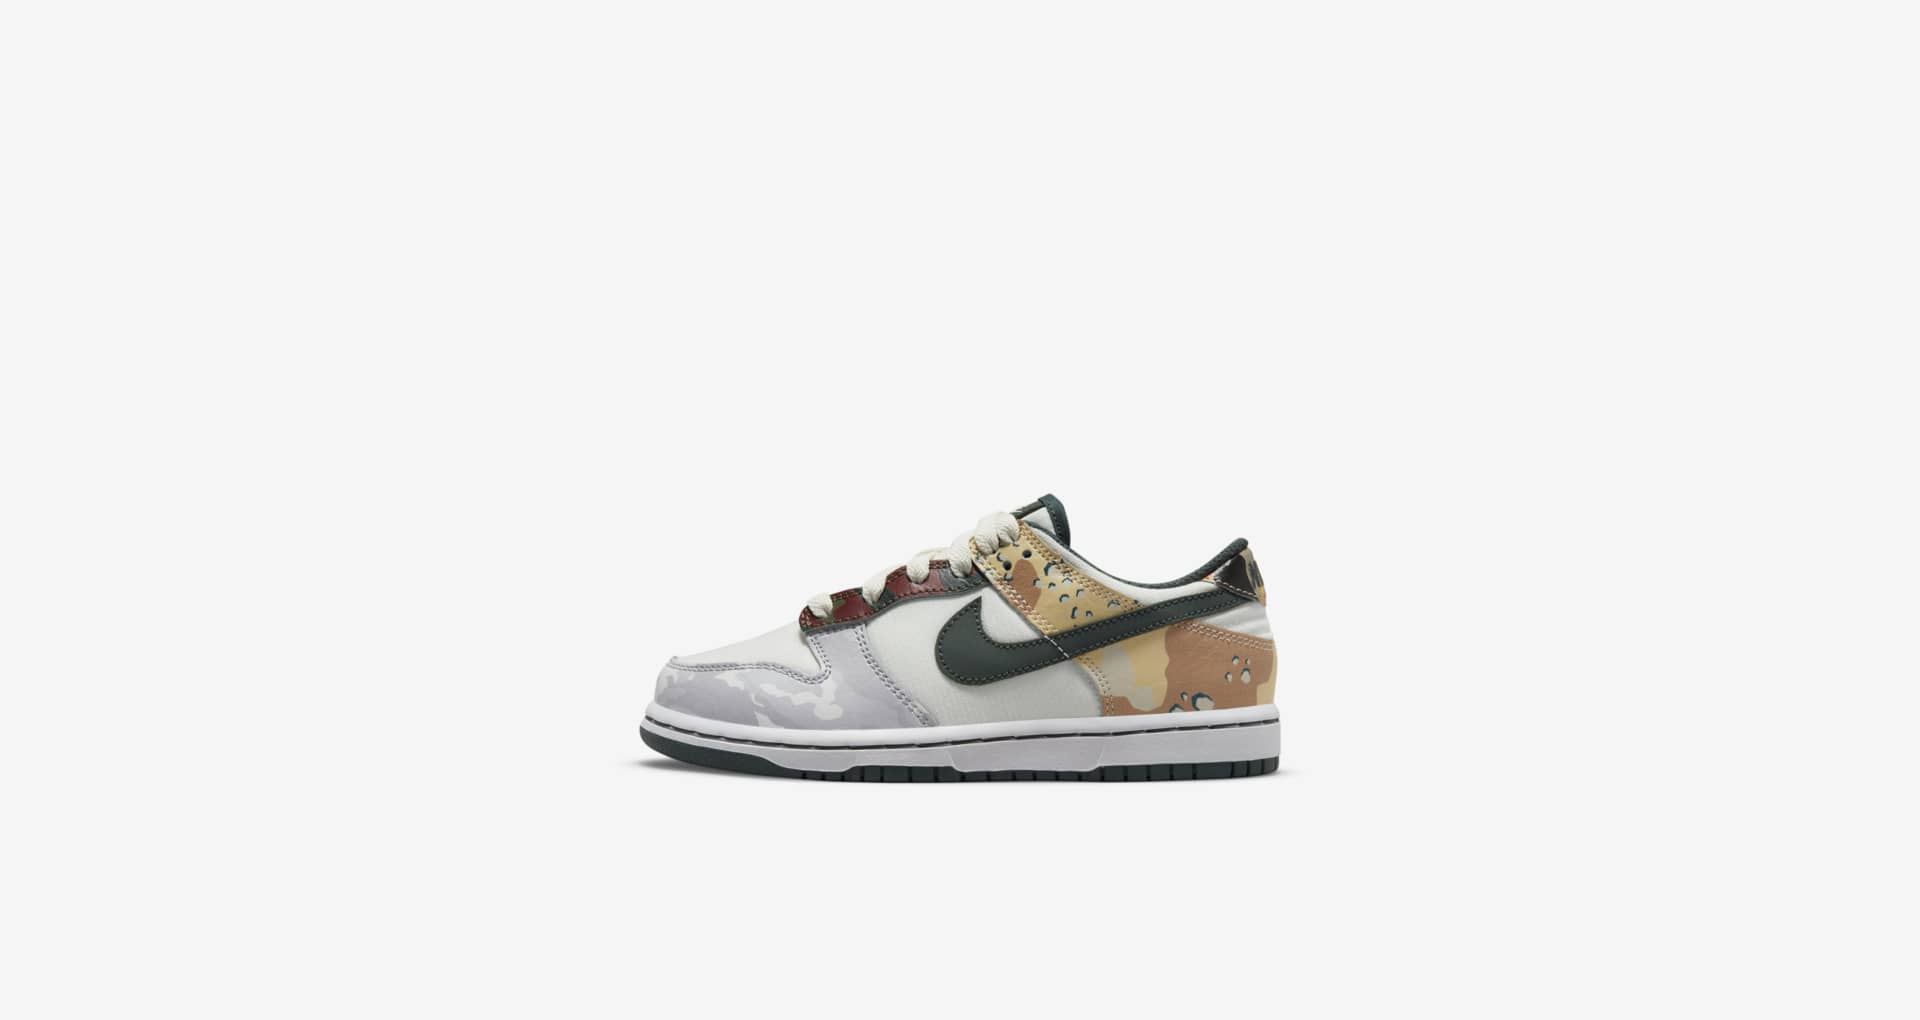 Dunk Low 'Sail Multi-Camo' Release Date. Nike SNKRS MY